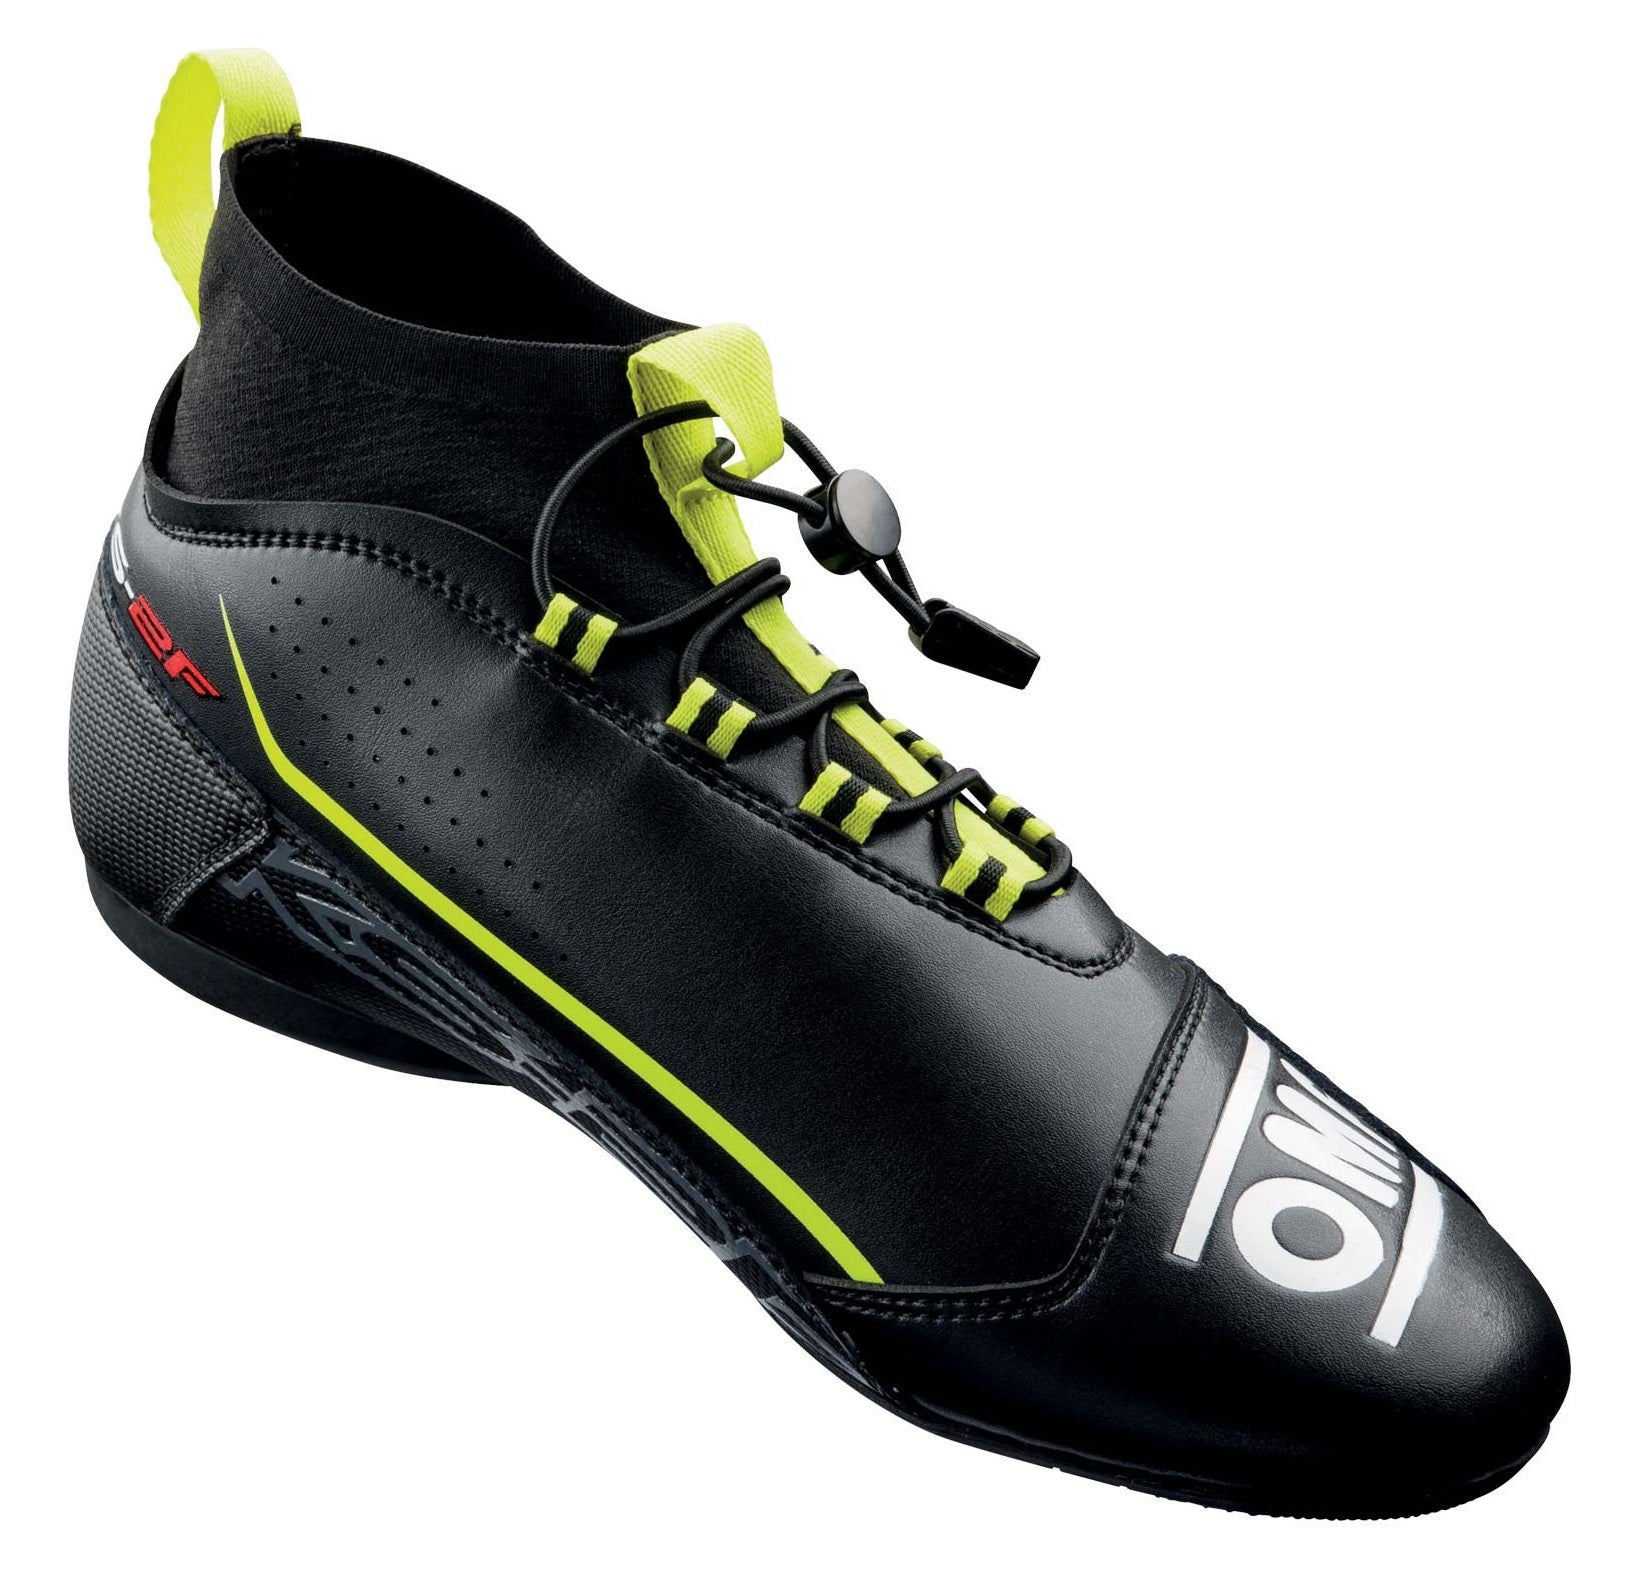 OMP KC0-0830-A01-178-41 KS-2F Karting shoes, black/fluo yellow, size 41 Photo-1 